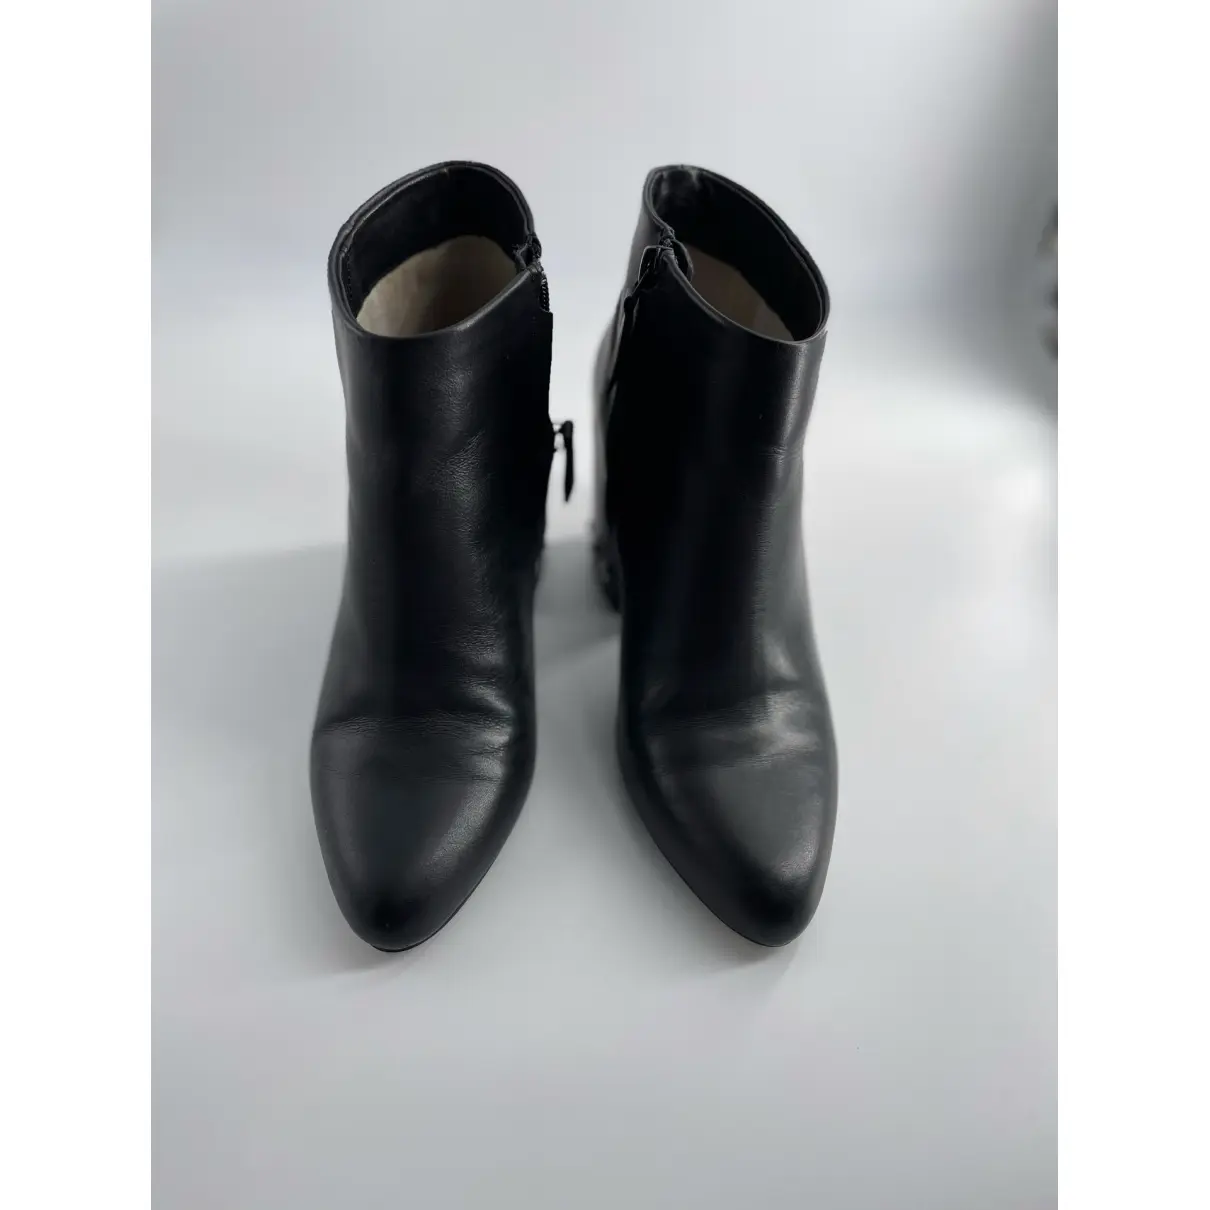 Buy Senso Leather ankle boots online